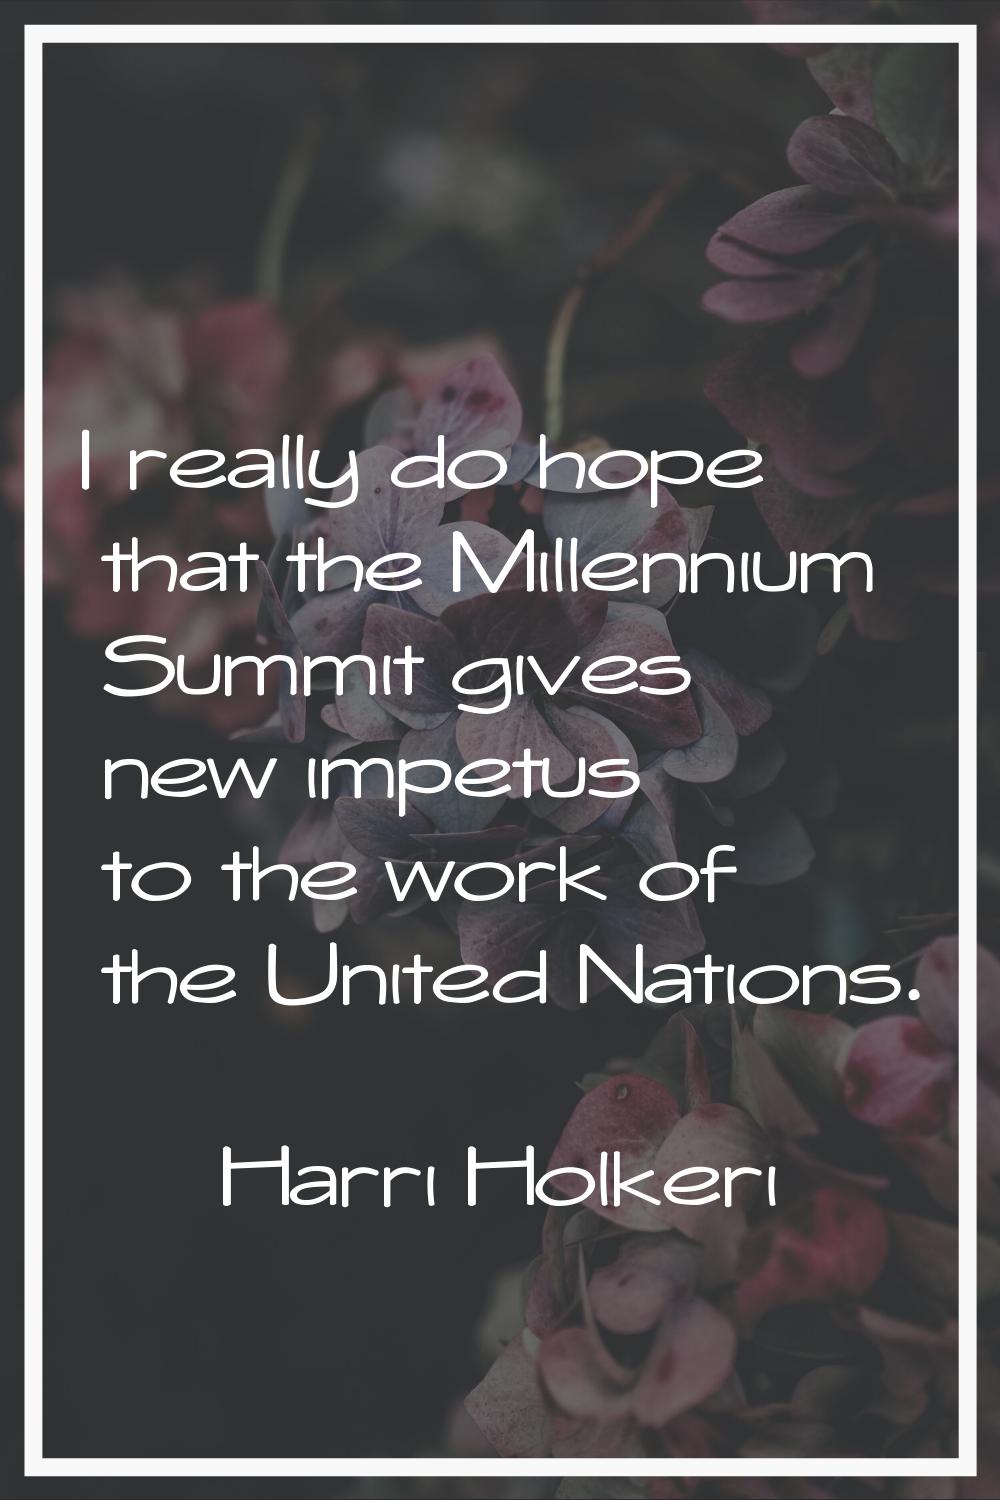 I really do hope that the Millennium Summit gives new impetus to the work of the United Nations.